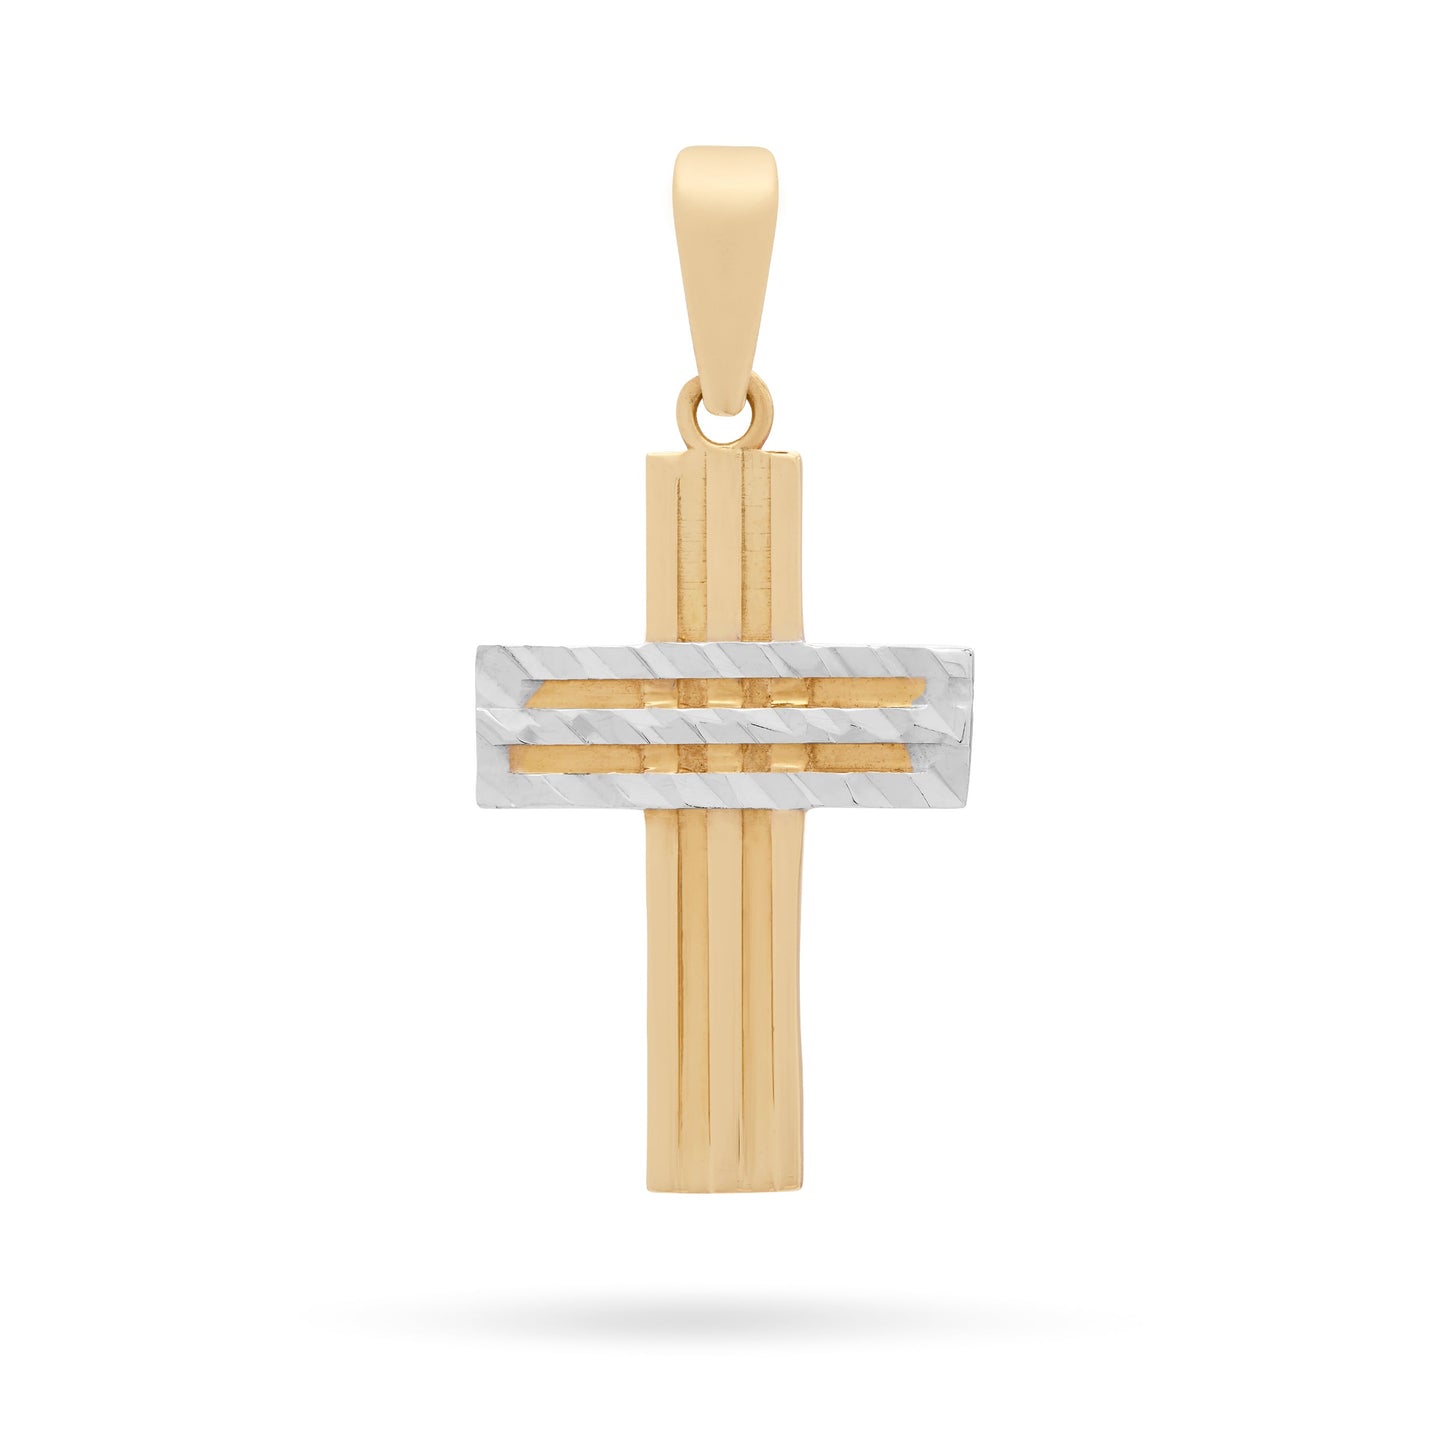 Mondo Cattolico Pendant 19 mm (0.75 in) Yellow Gold Cross Pendant With Grooves and White Gold Details